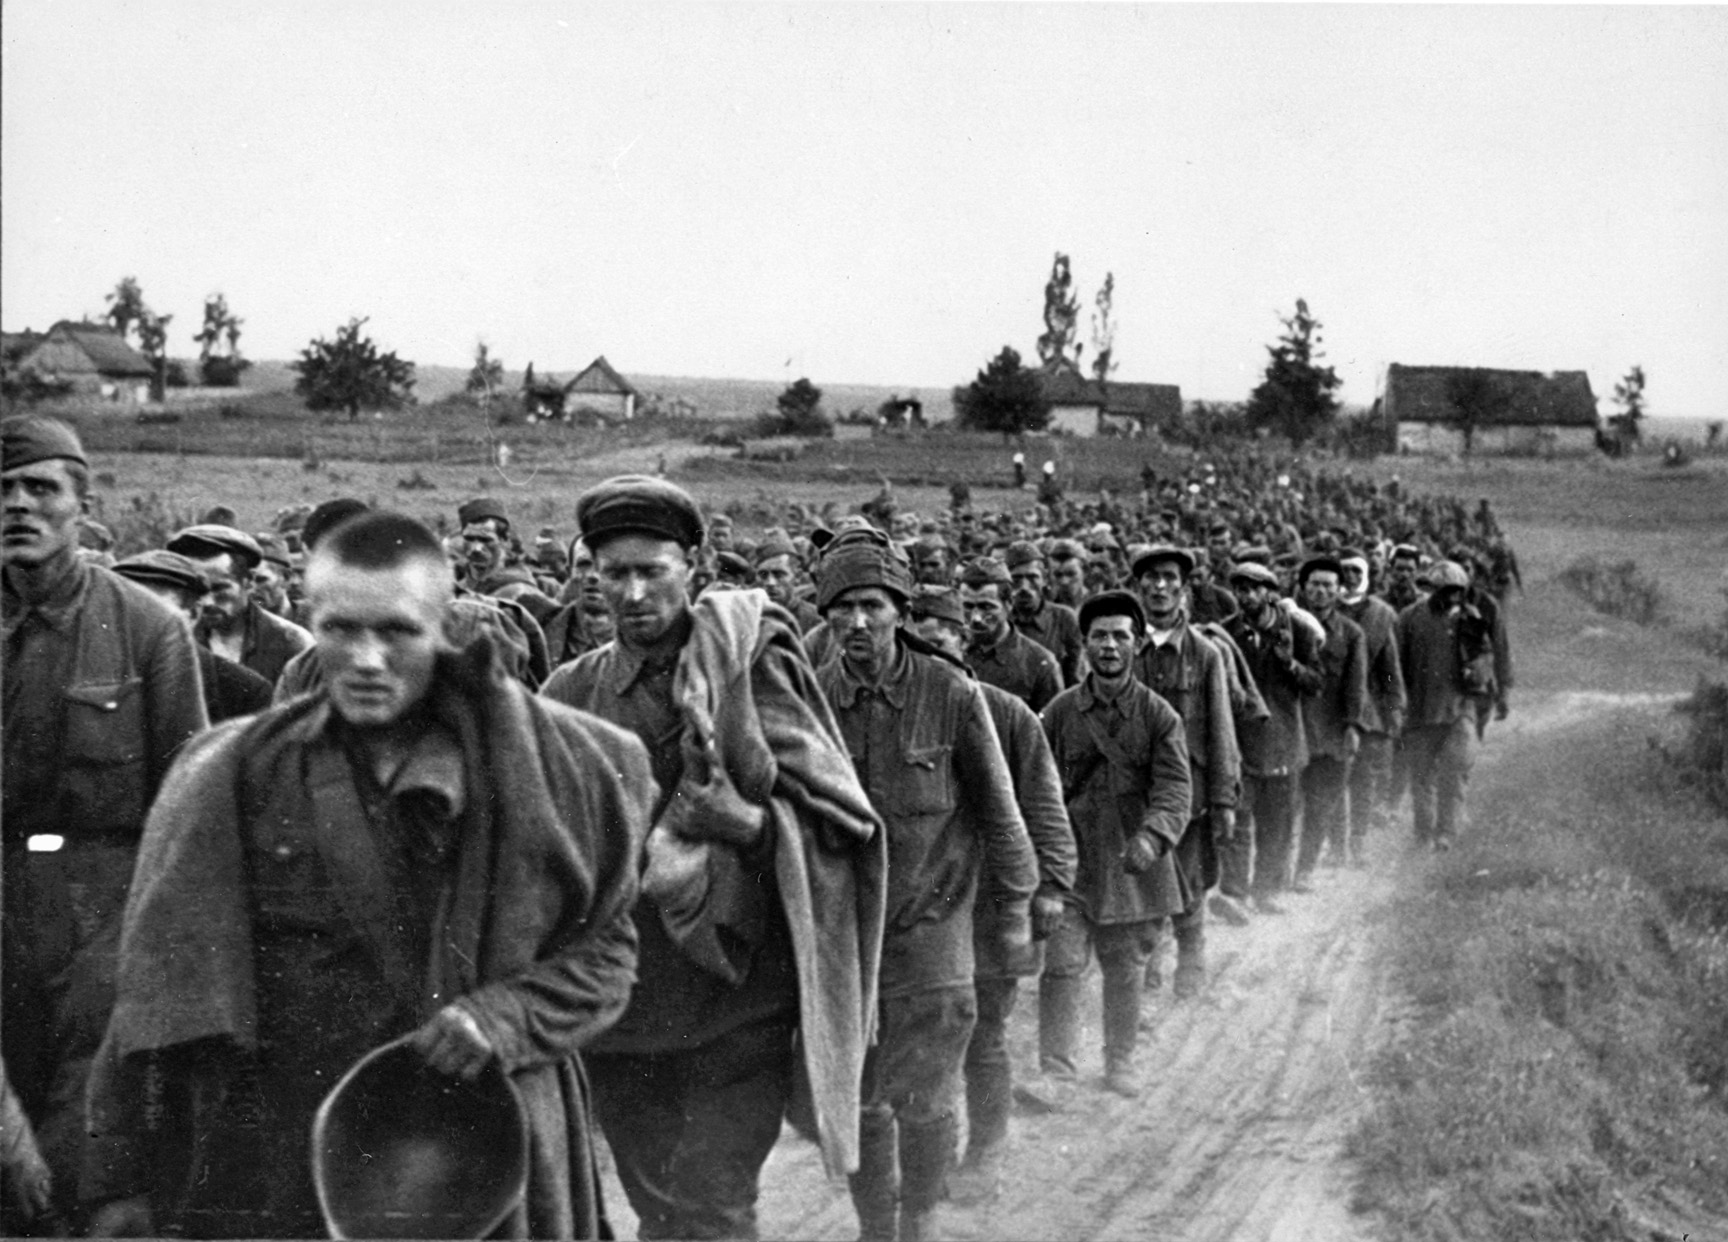 A long stream of Russian prisoners stretches into the distance in this image of the heady days of the German advance during Operation Barbarossa. German encirclements netted hundreds of thousands of prisoners before the Nazi juggernaut was halted.